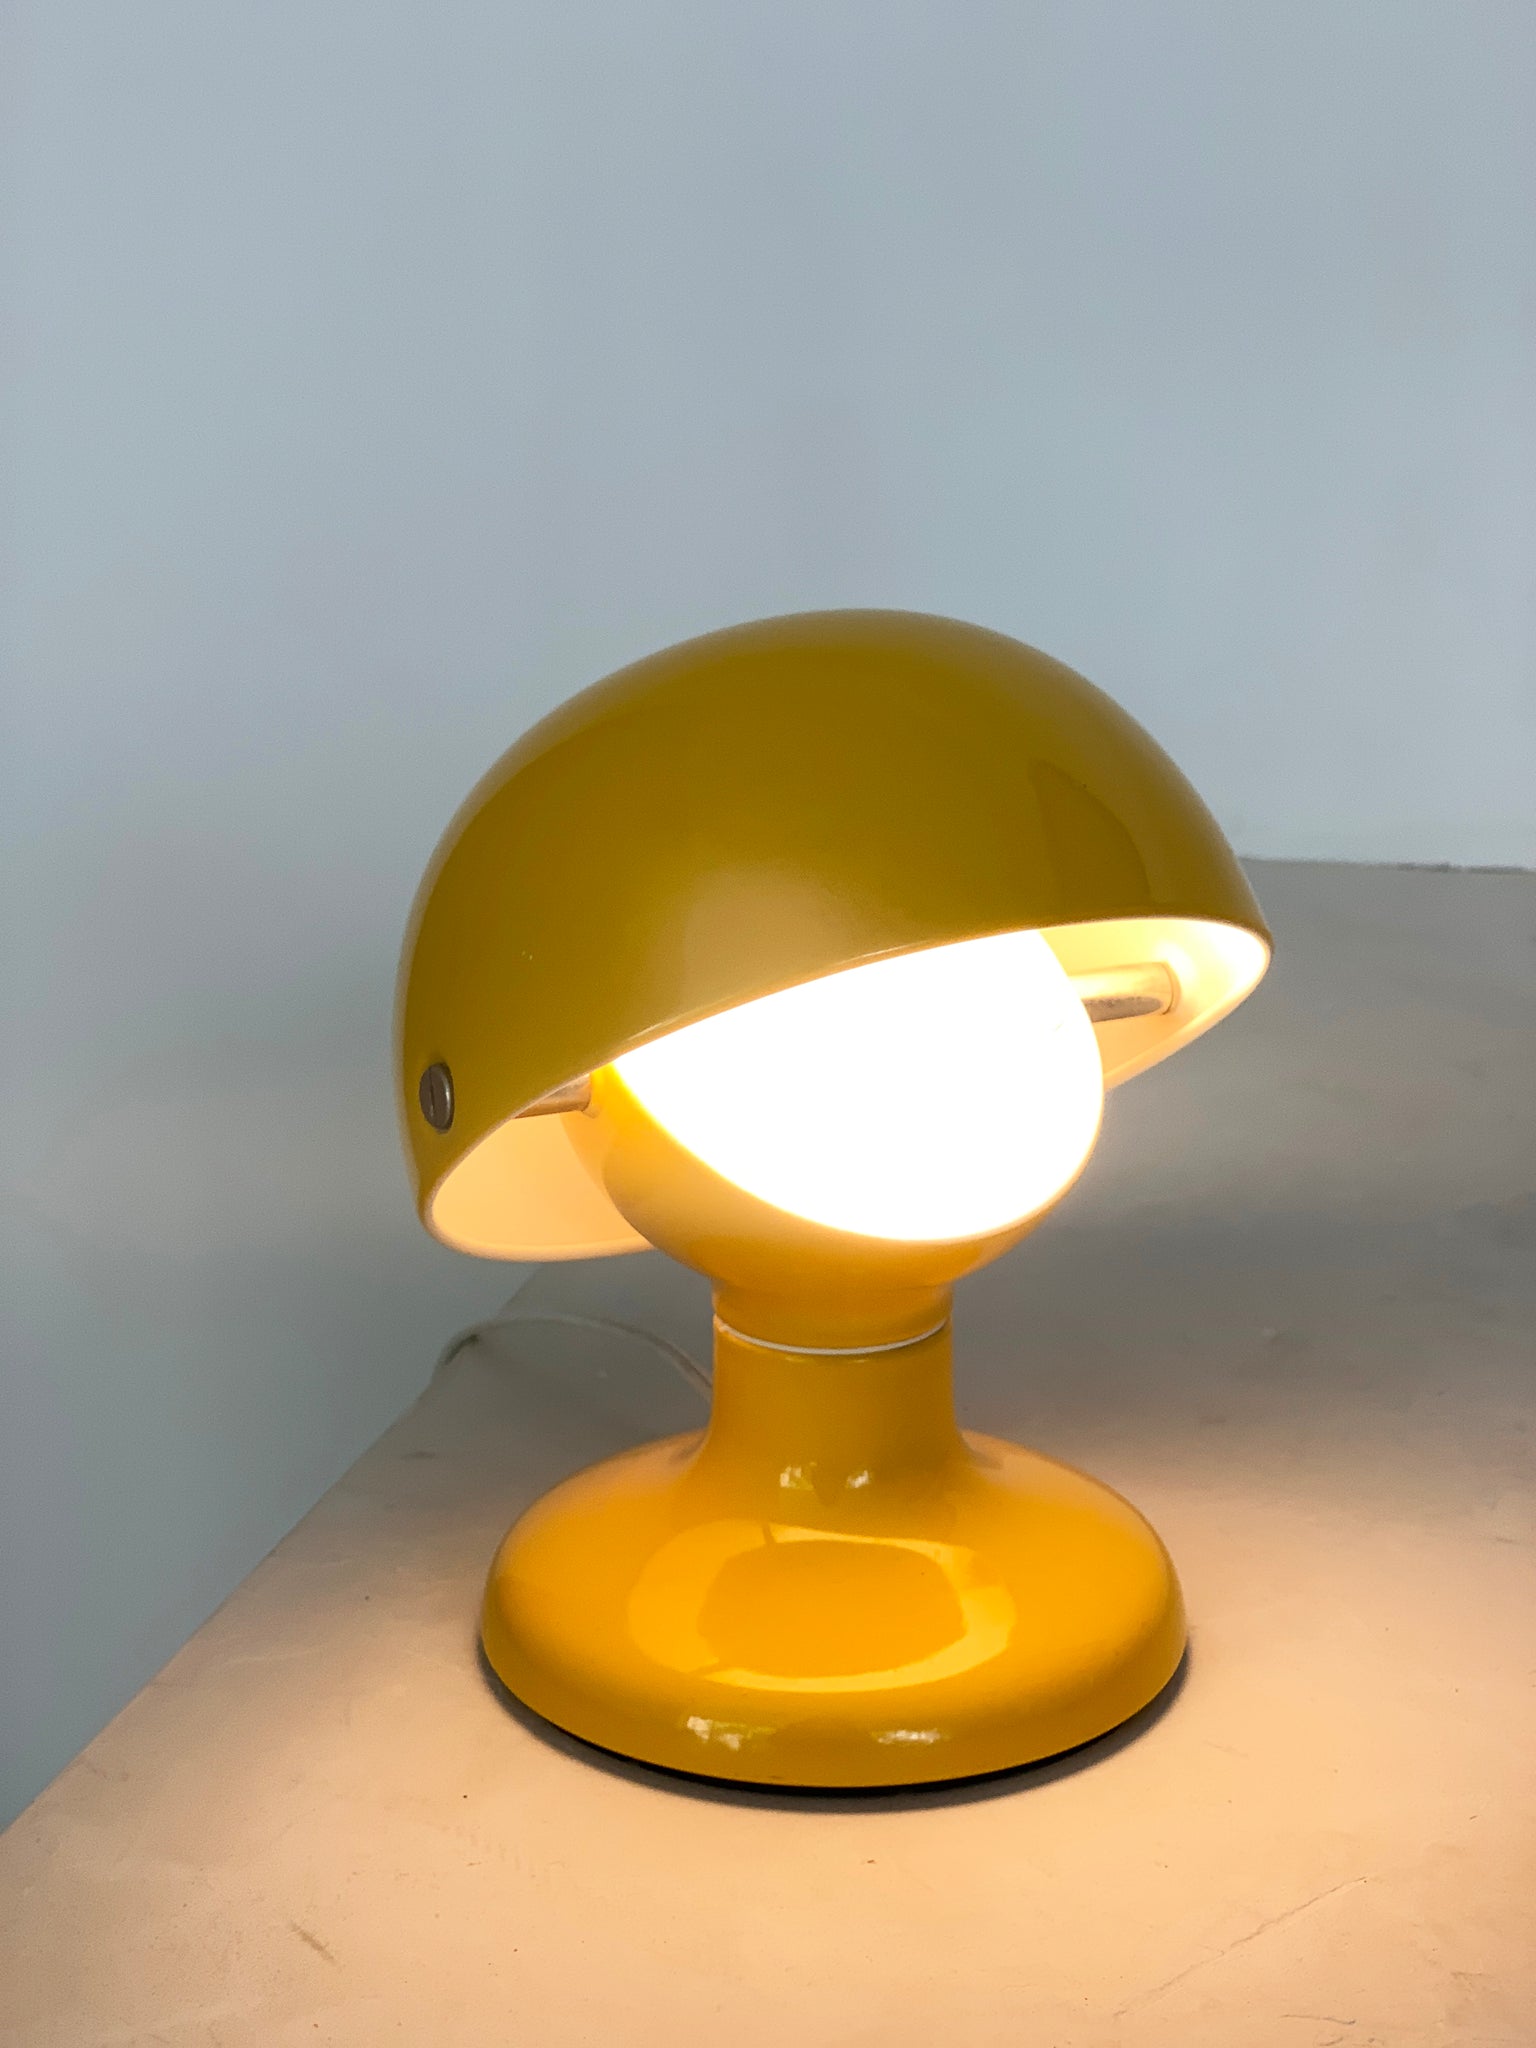 Yellow 1963 “Jucker” Lamp by Tobia Scarpa for Flos, Italy